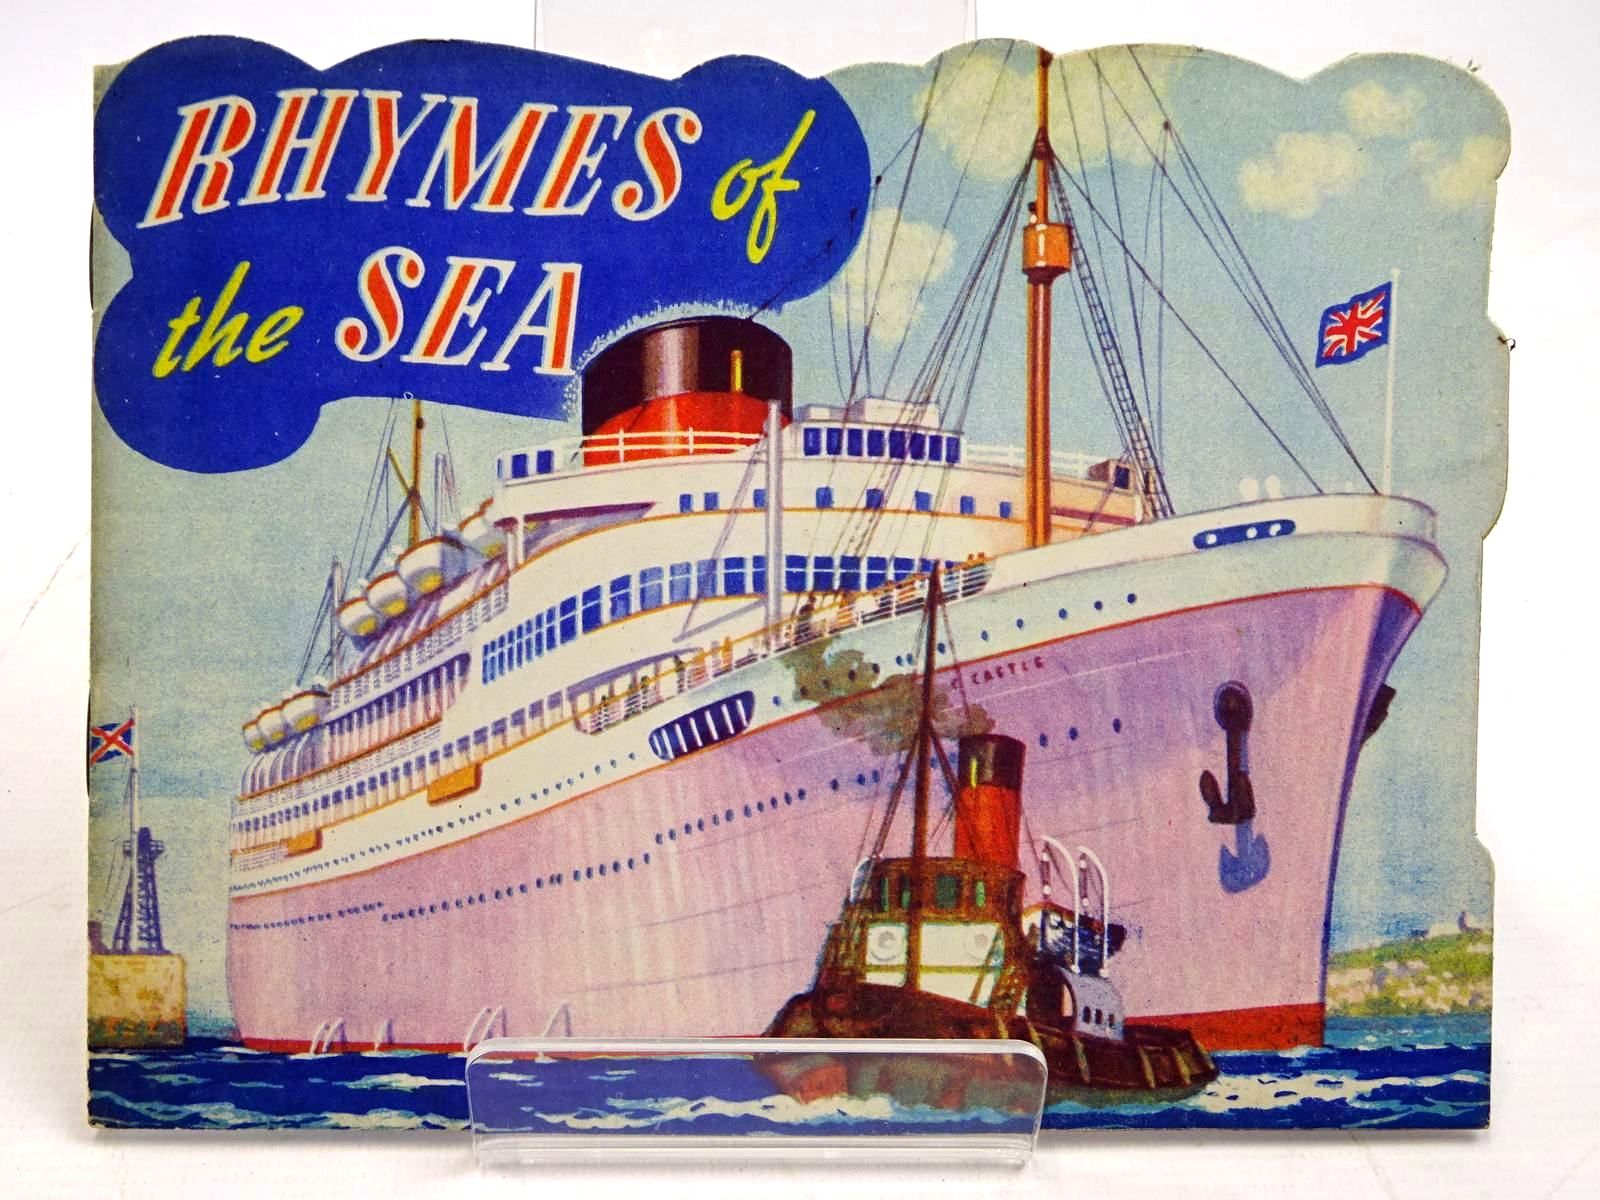 Photo of RHYMES OF THE SEA published by Birn Brothers Ltd. (STOCK CODE: 2131565)  for sale by Stella & Rose's Books